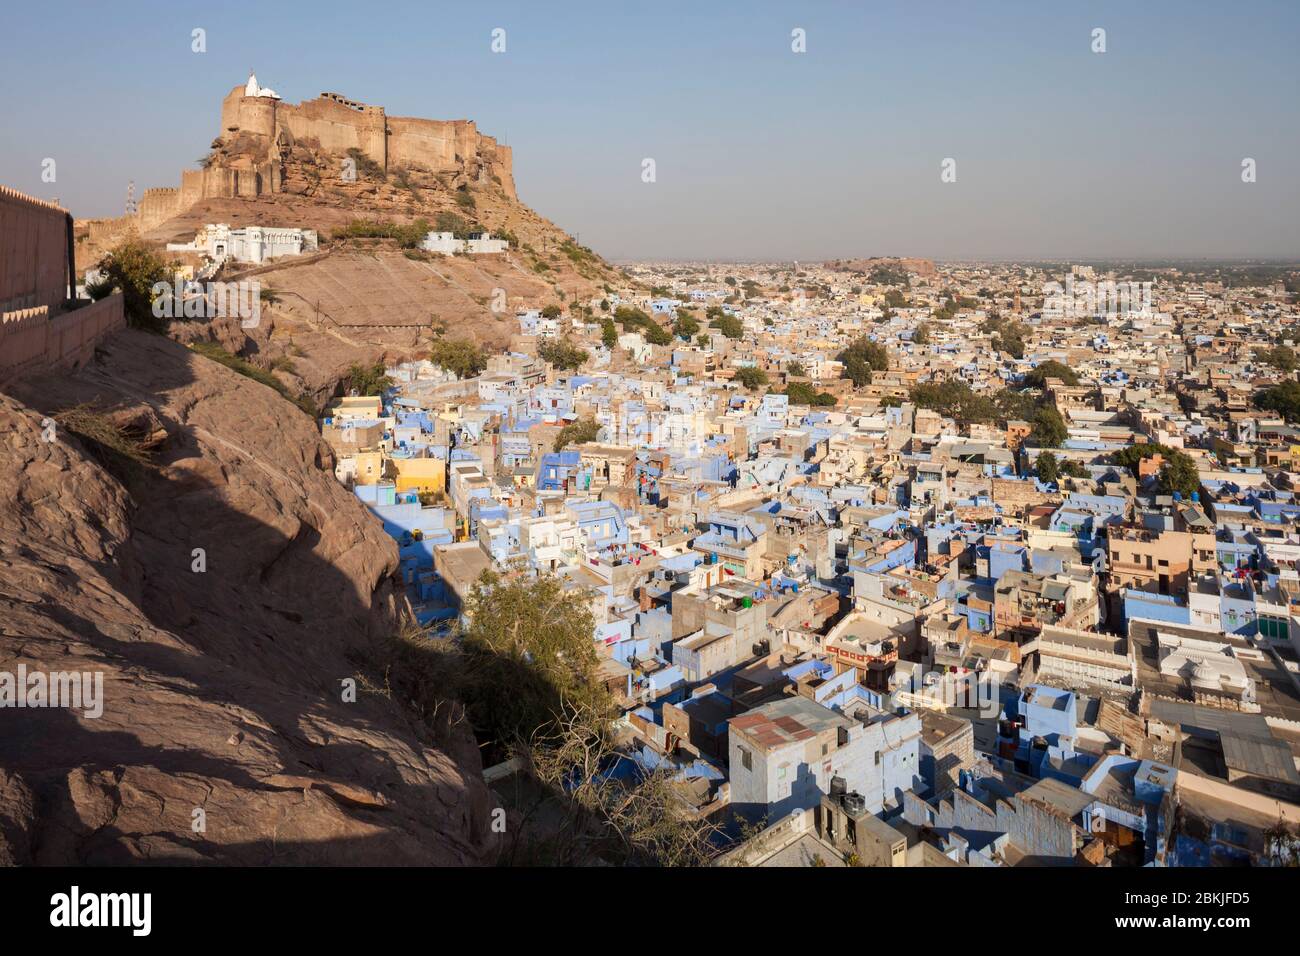 India, Rajasthan, Jodhpur, Pachetia Hill, general view of the blue city dominated by Fort Mehrangarh Stock Photo